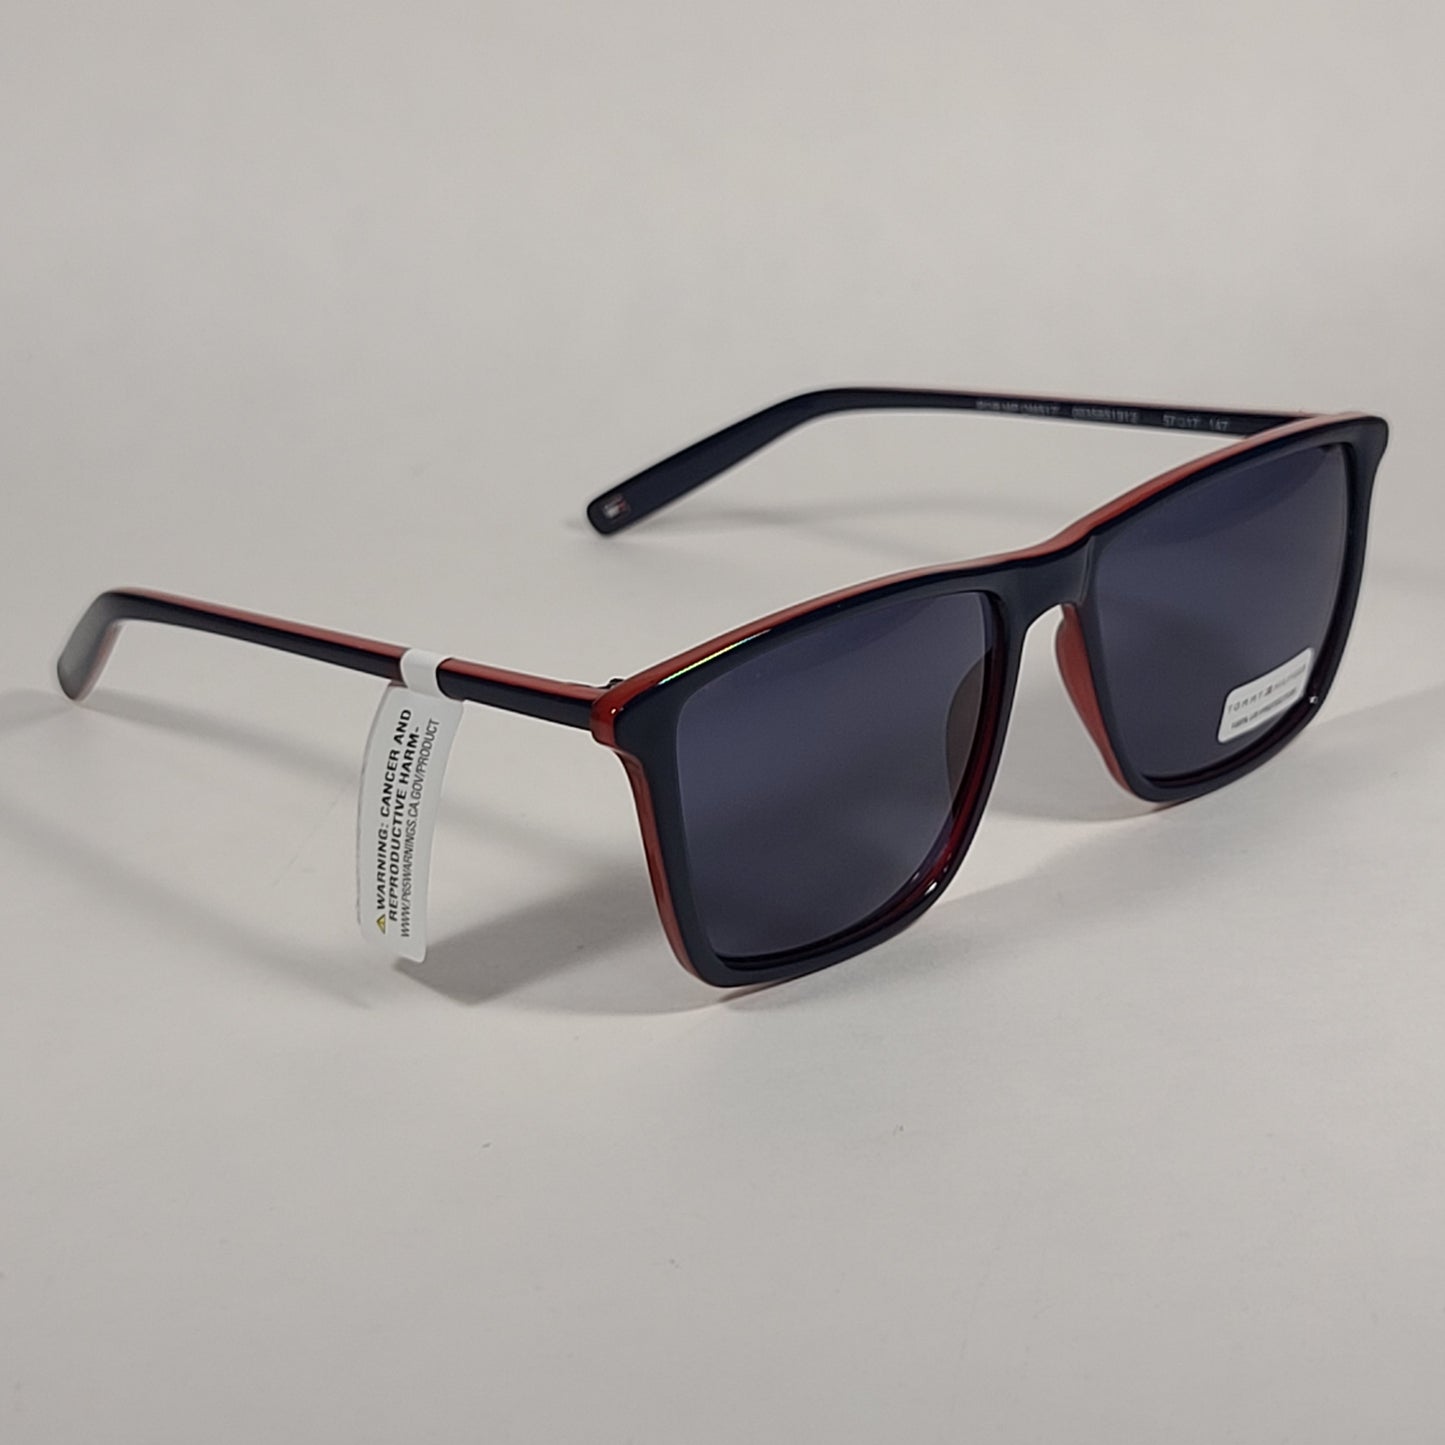 Tommy Hilfiger Rob Square Sunglasses Two Tone Navy Blue Red Gray Lens ROB MP OM517 - Sunglasses